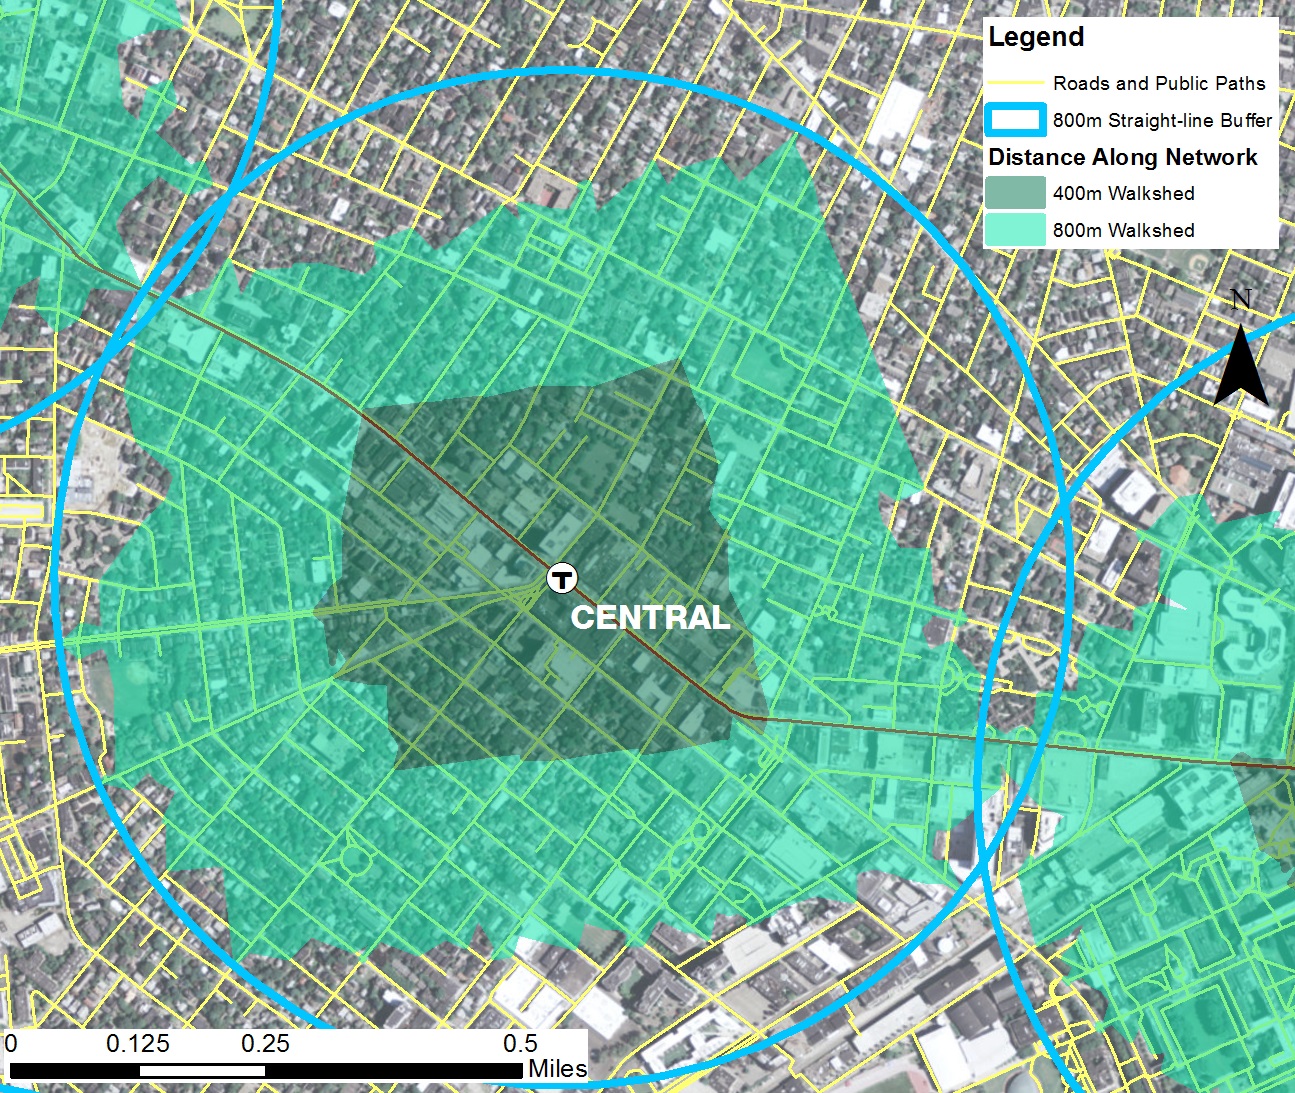 Walkshed map of area around Central Station